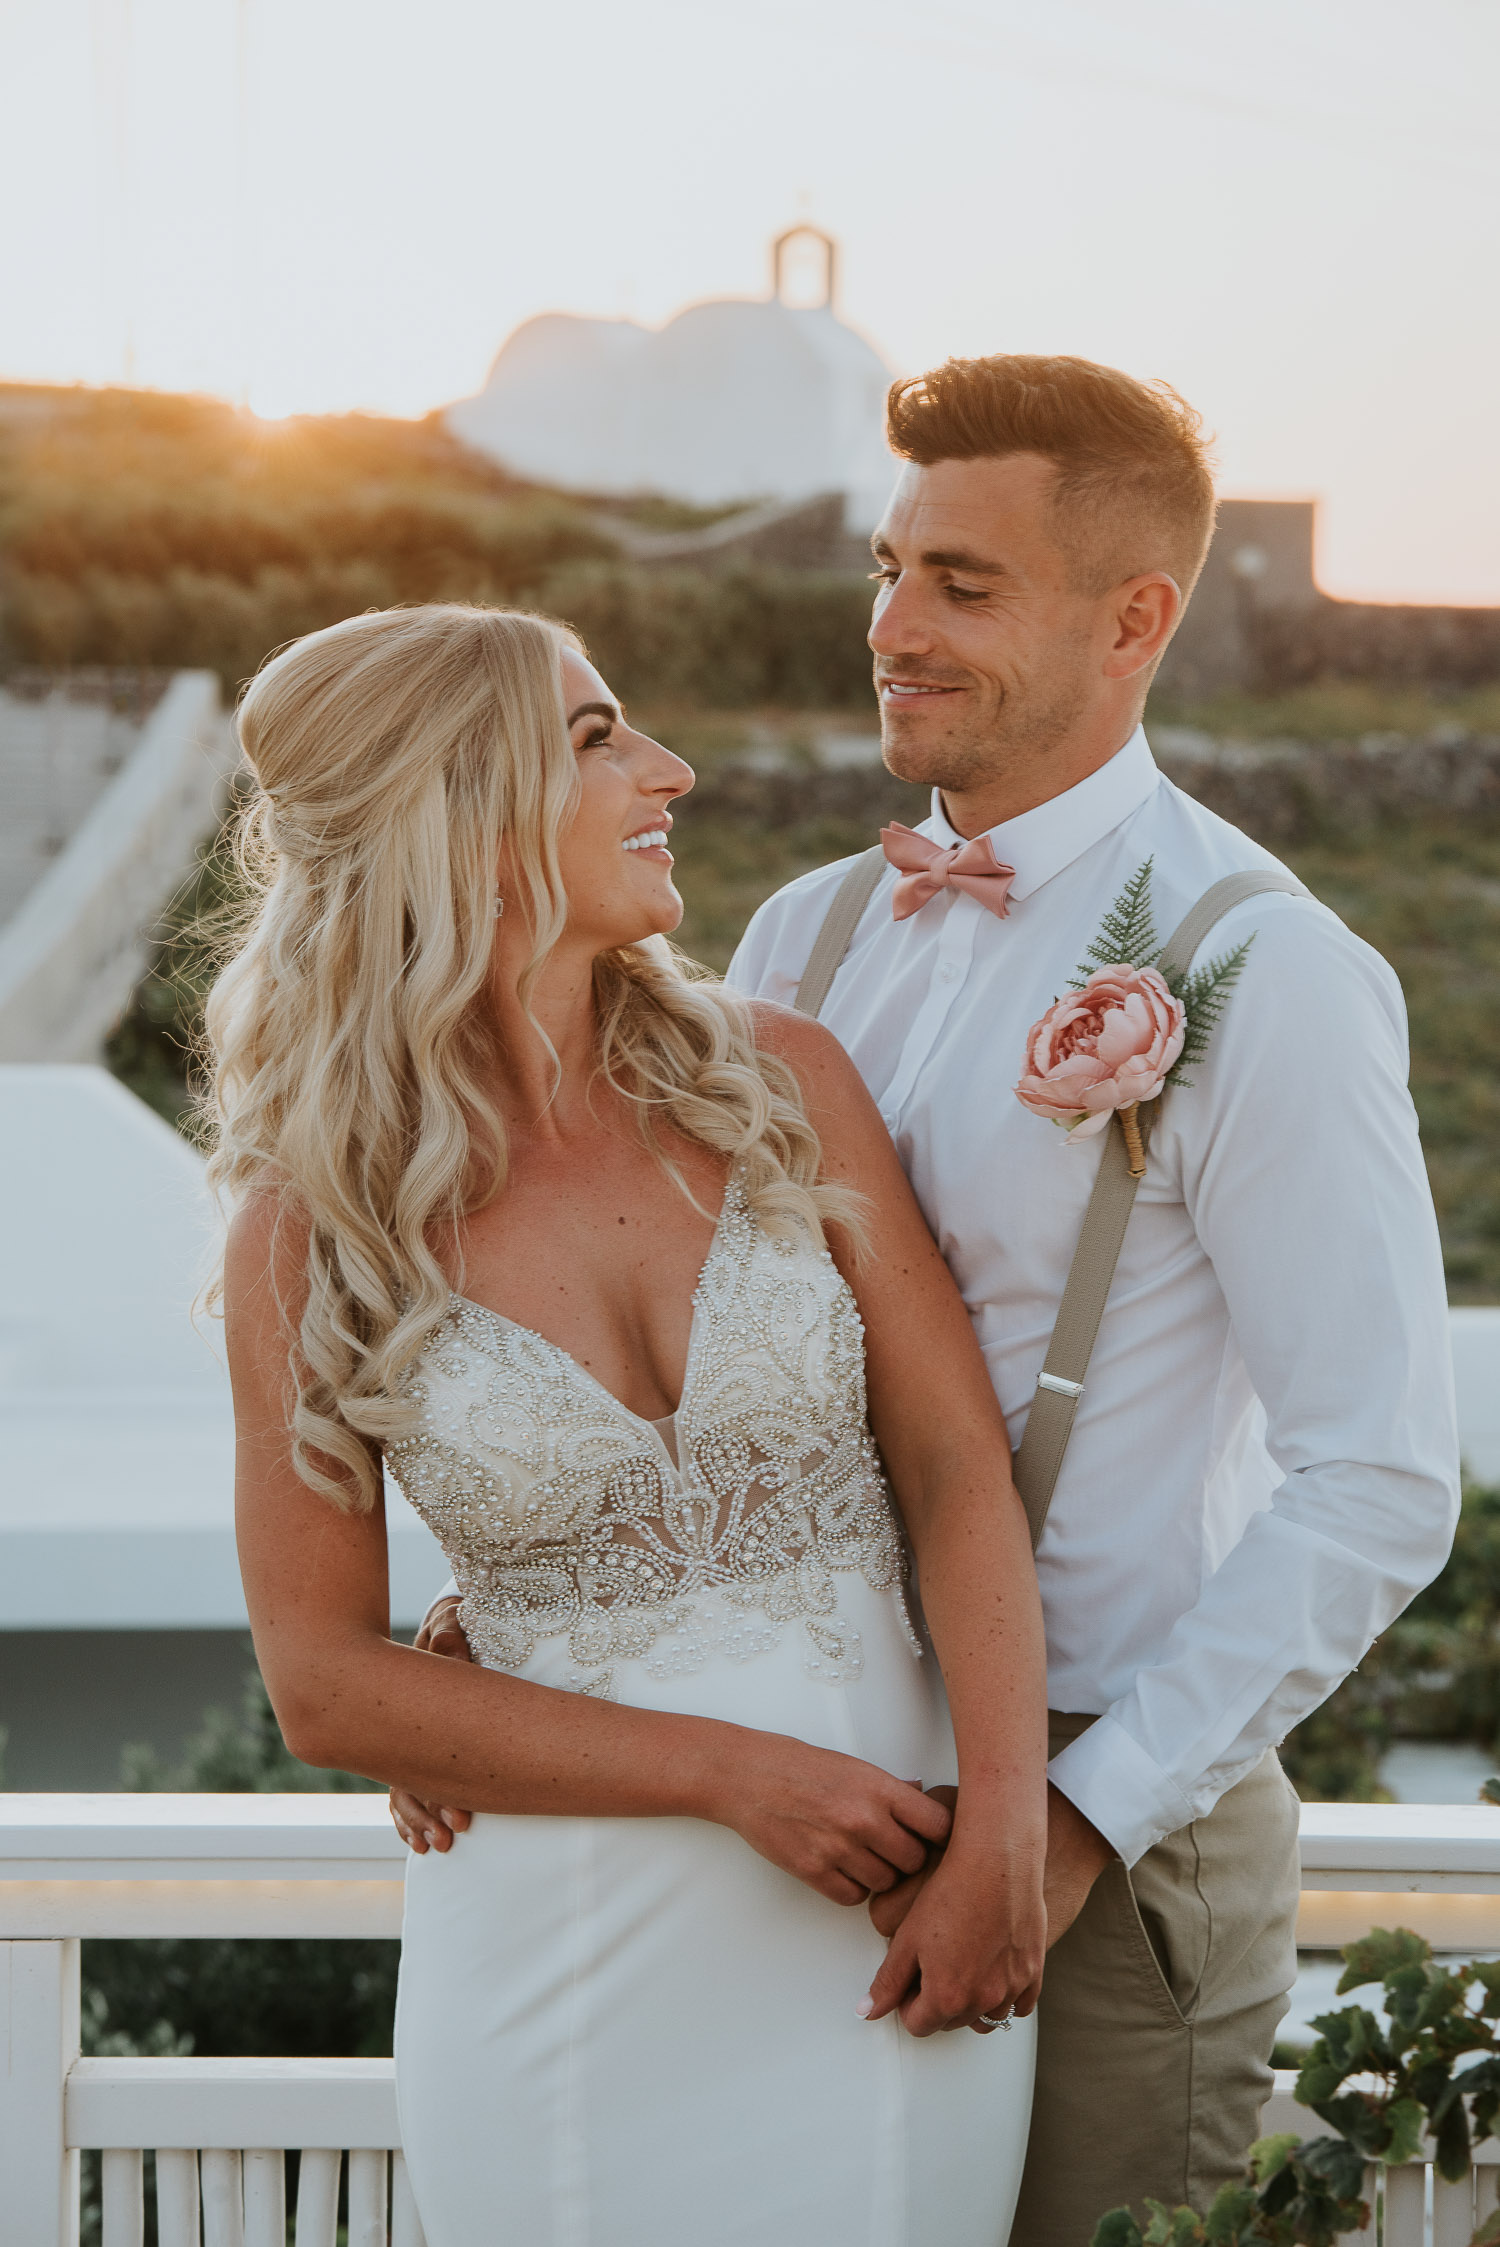 Wedding photographer Santorini: close up of bride and groom smiling backlit by golden sunset light with a church in the background by Ben and Vesna.